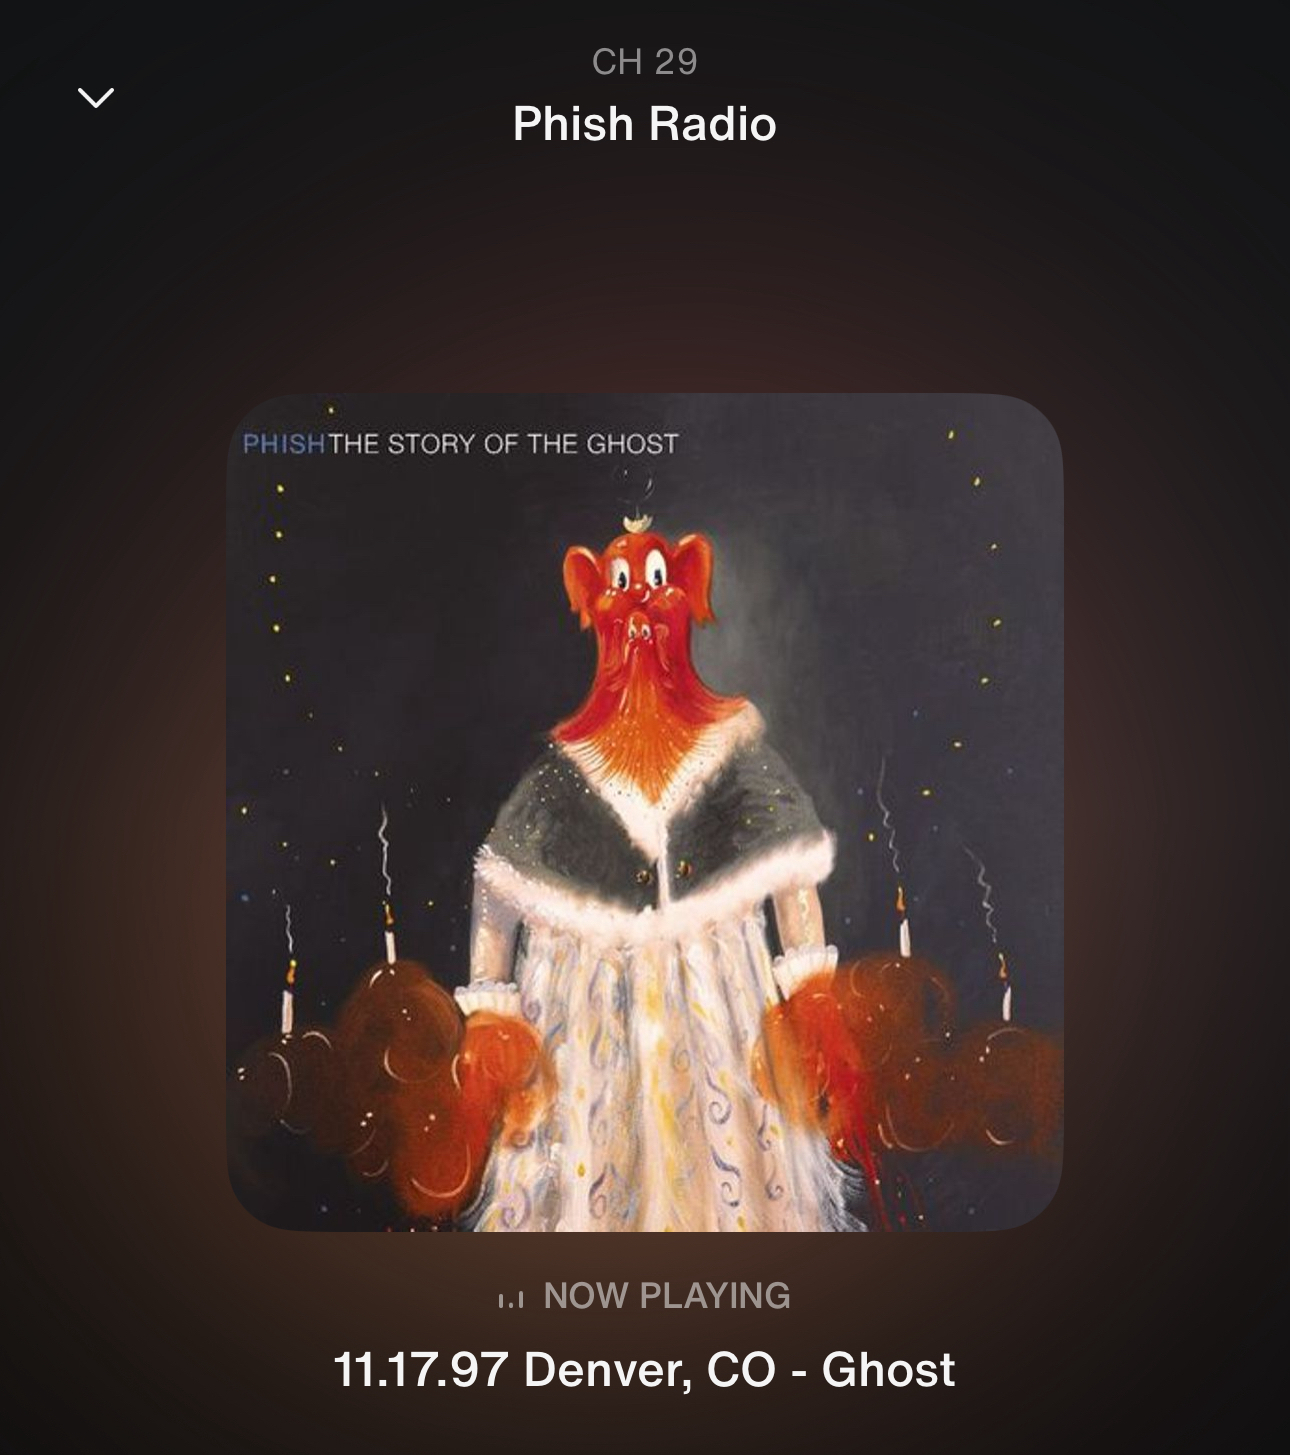 Digital display of a music player tuned to Phish Radio, showing the album cover art for “Phish: The Story of the Ghost.” The art features an abstract painting of a red ghostly figure in a white gown against a dark background.